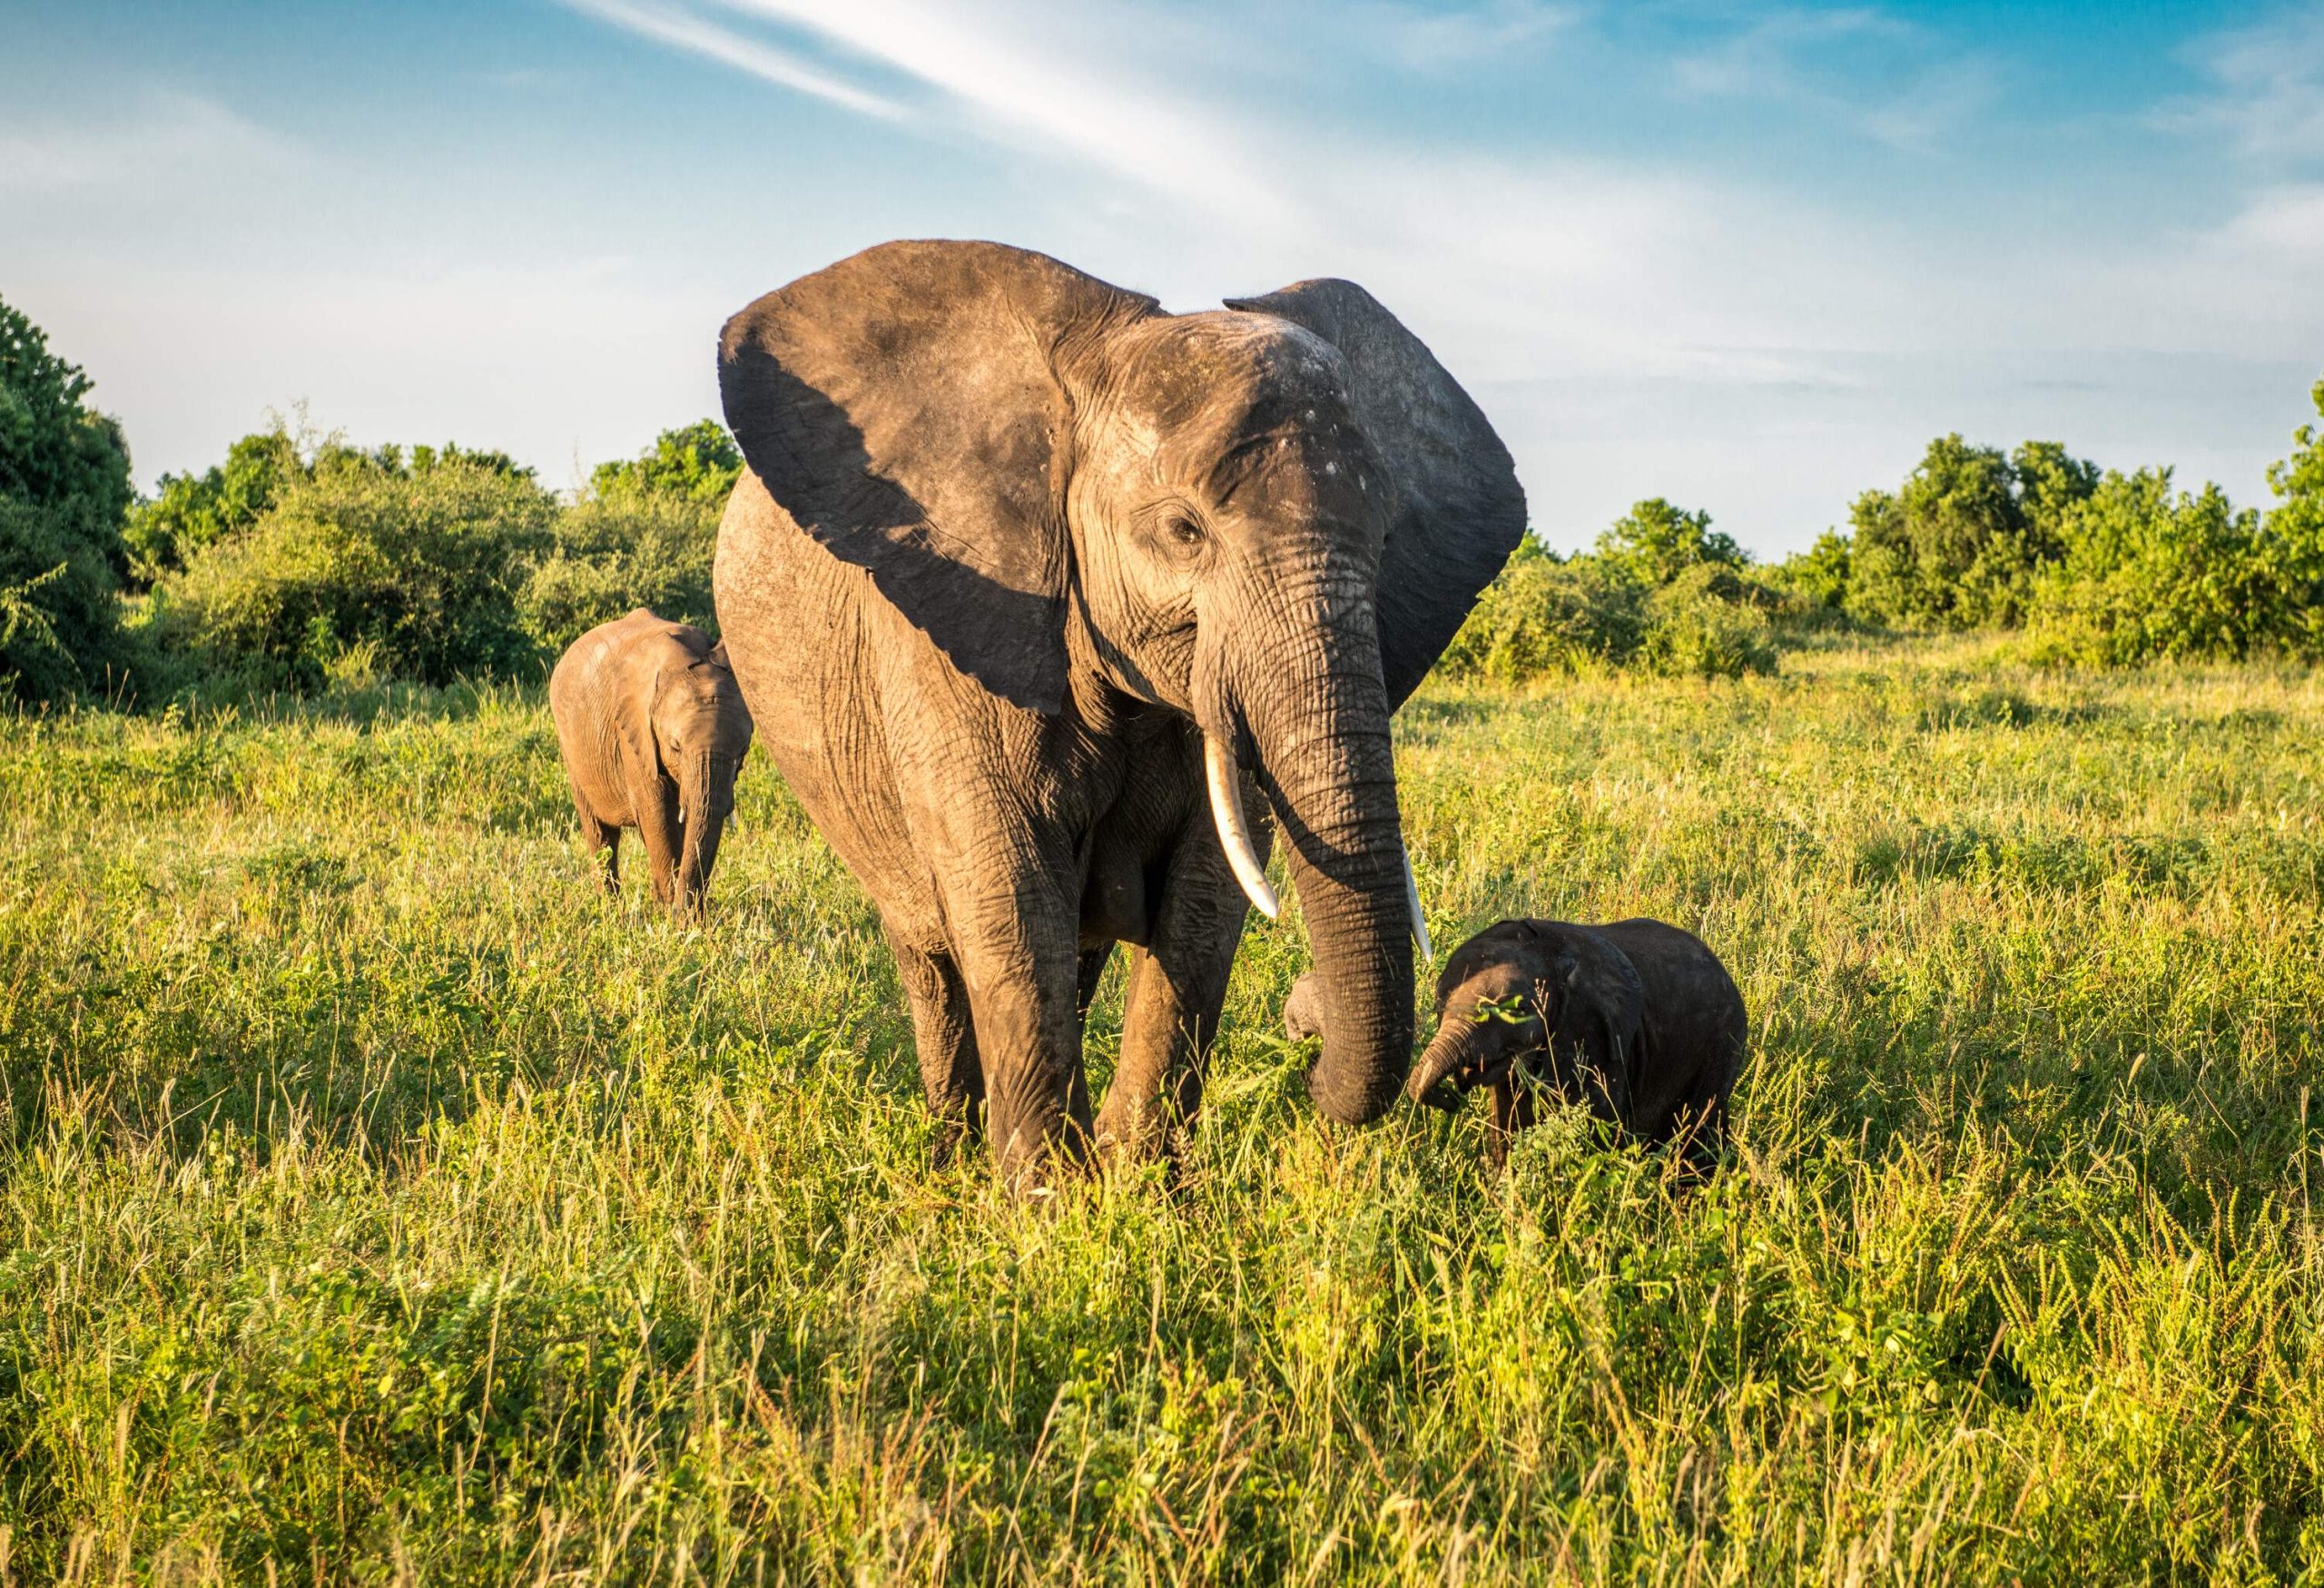 A family of three elephants grazing on the grassland in the wilderness.